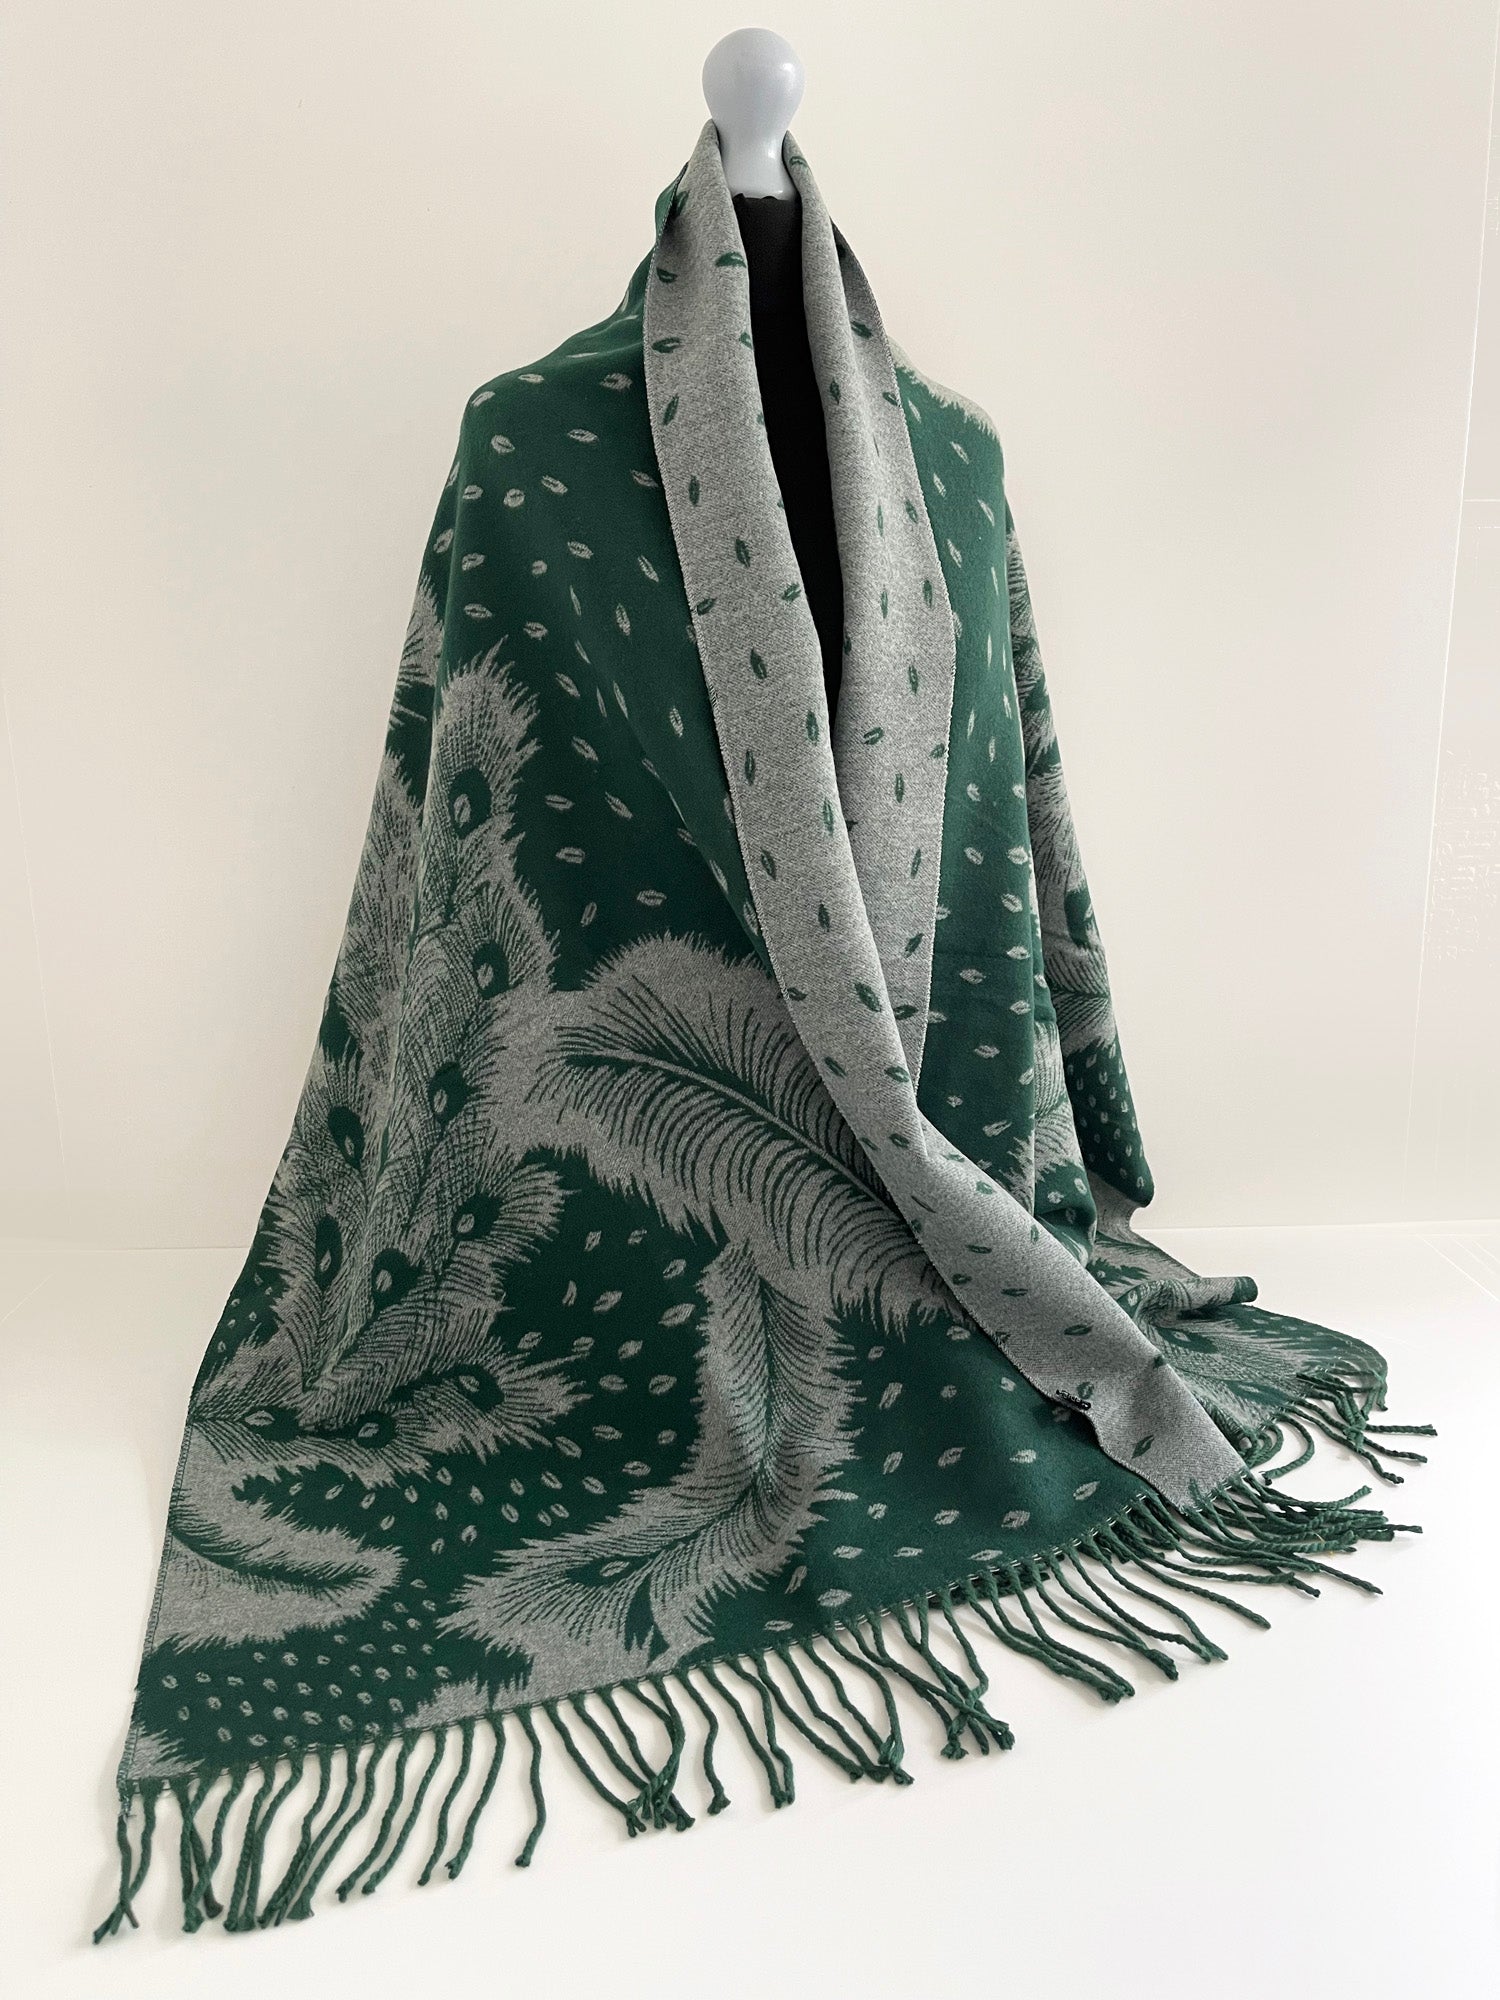 LARGE GREEN CASHMERE FEATHER PRINT REVERSIBLE WINTER SHAWL BLANKET SCARF